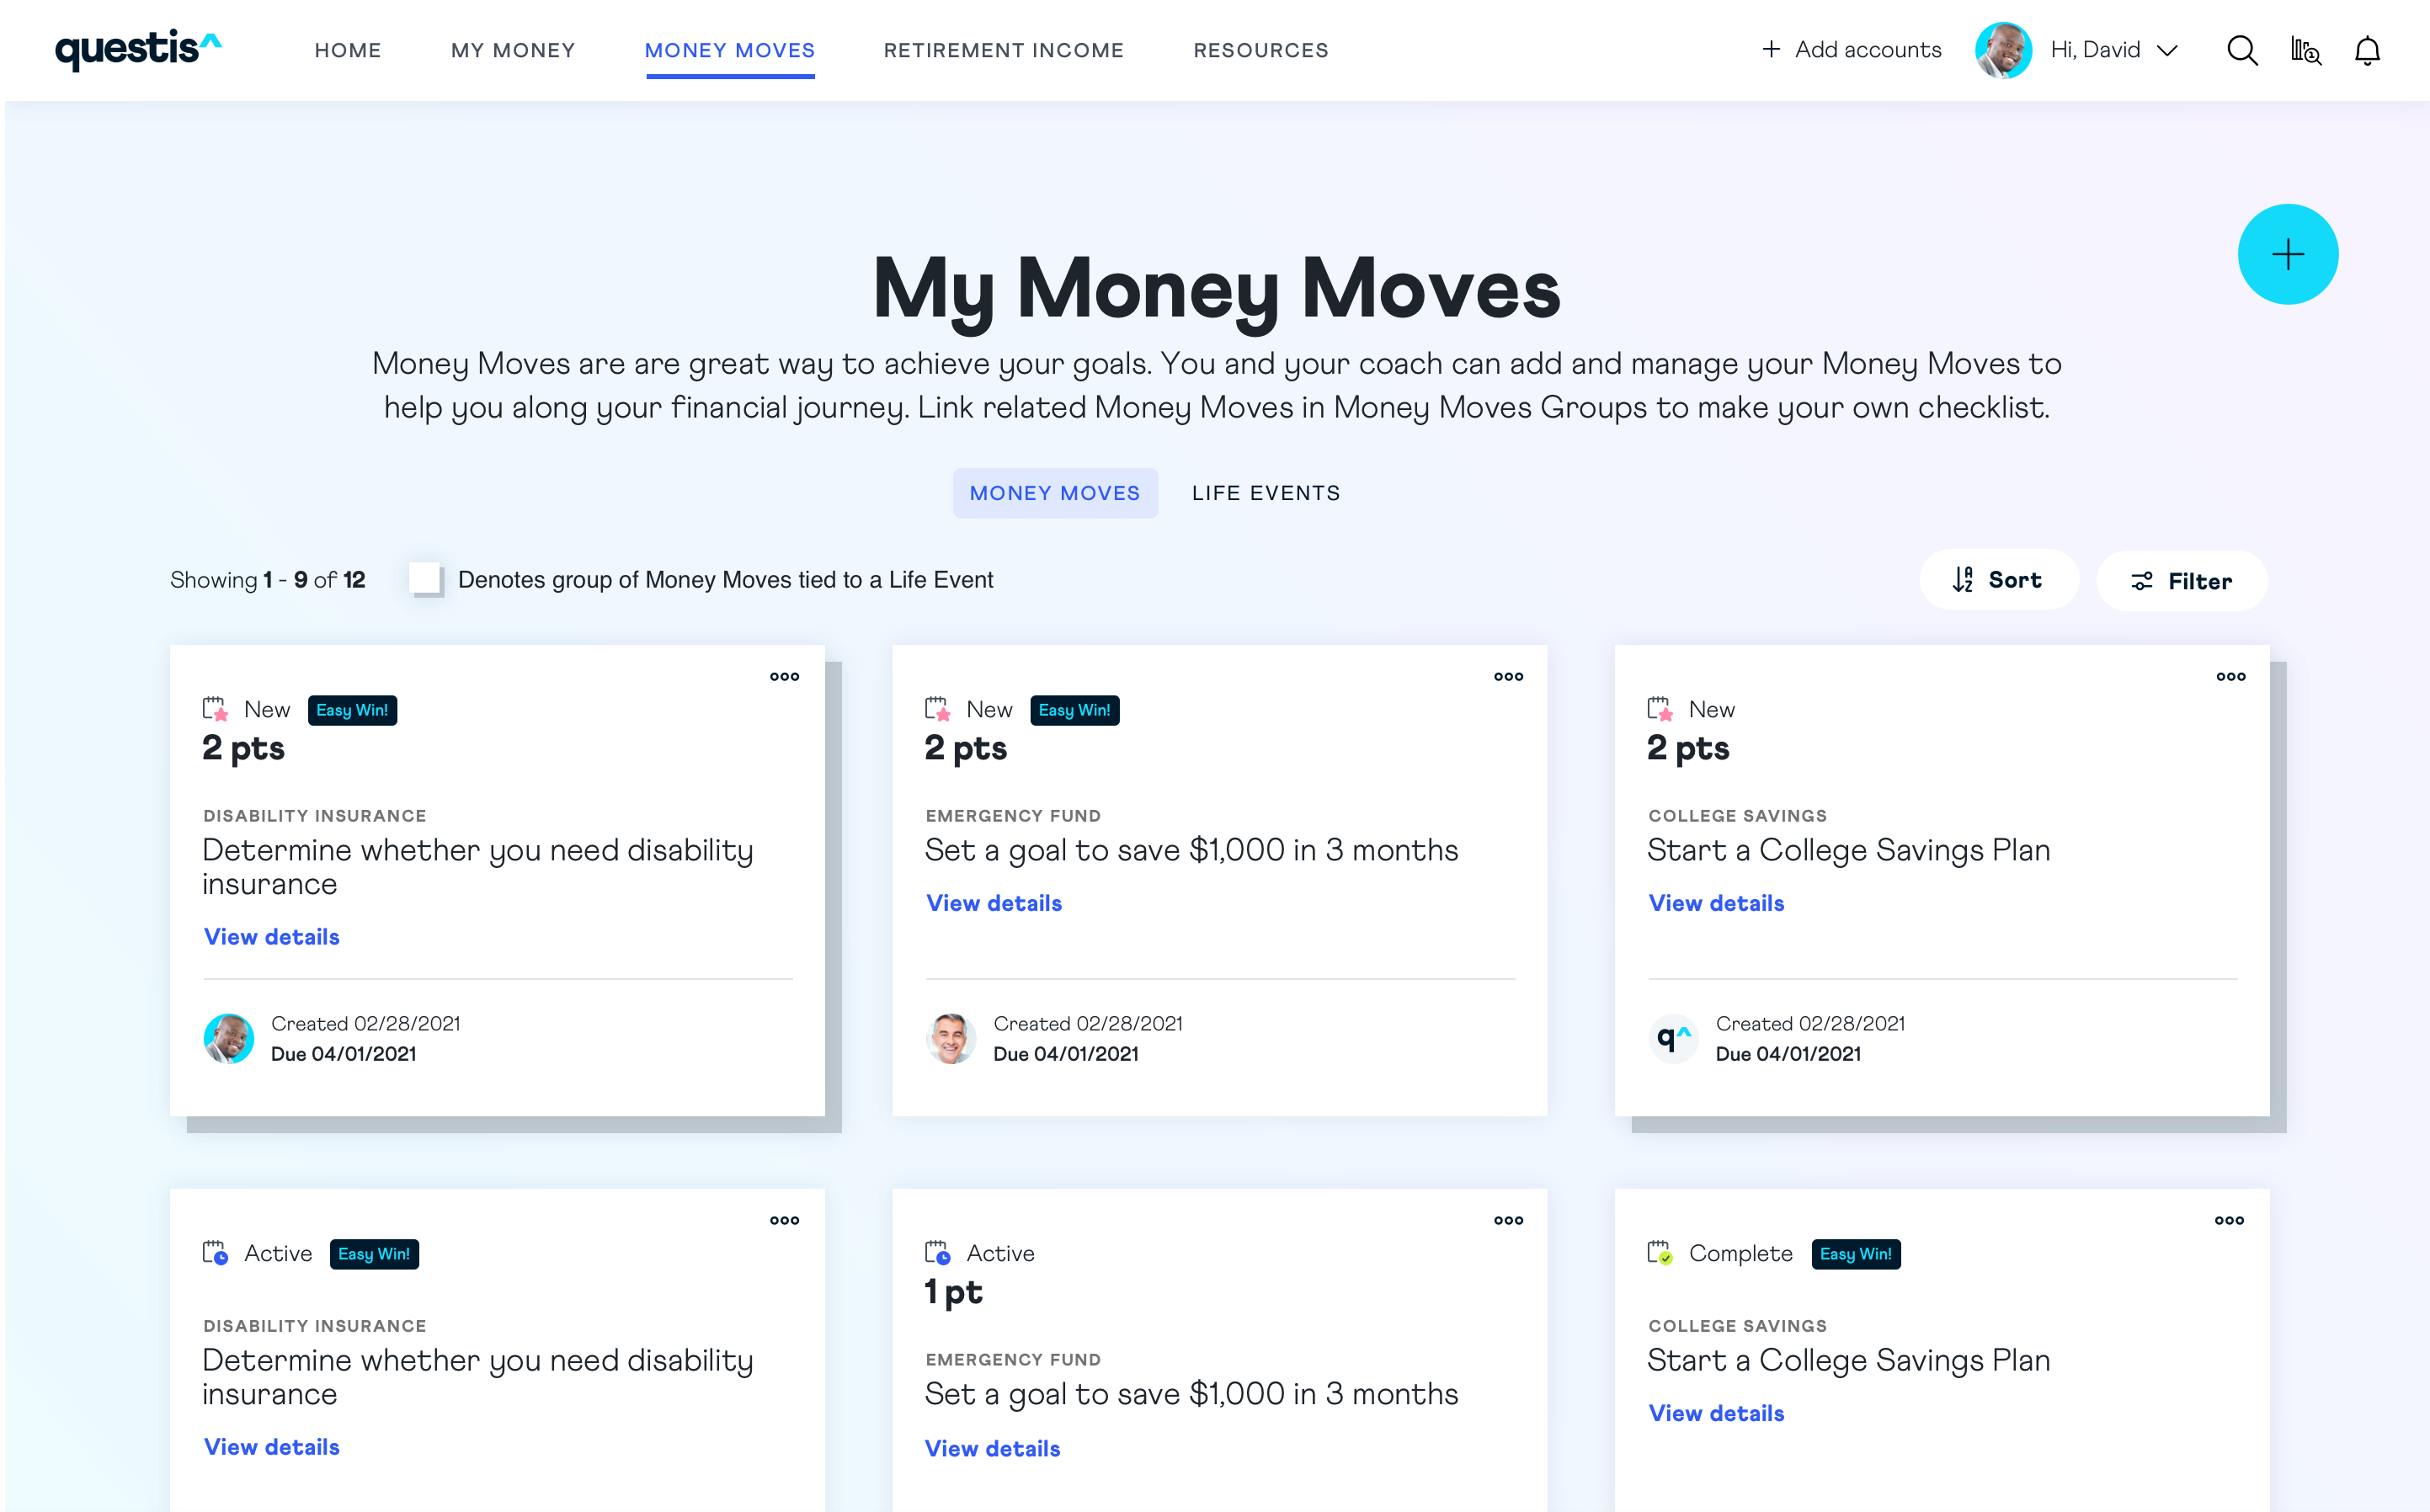 Money Moves are intended to give the users steps towards improving their Financial Wellness ScoreTM and do just that once they are completed. These are automatically generated based on the user's Financial Wellness Score and can also be created manually.